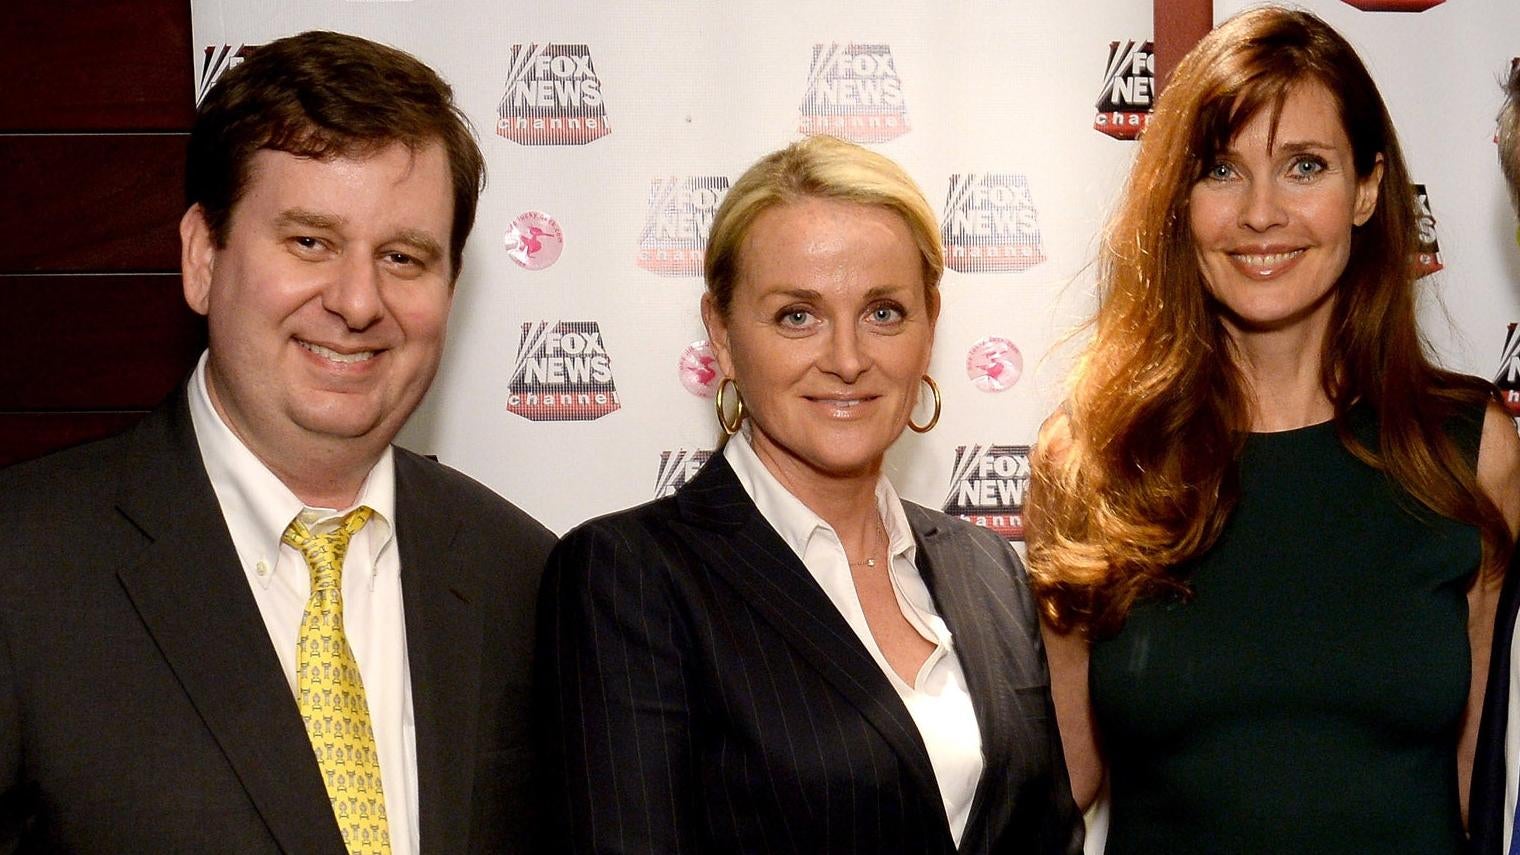 Susan Scott, centre, when she was still Senior Vice President of Programming & Development at Fox News. (Photo: Larry Busacca, Getty Images)